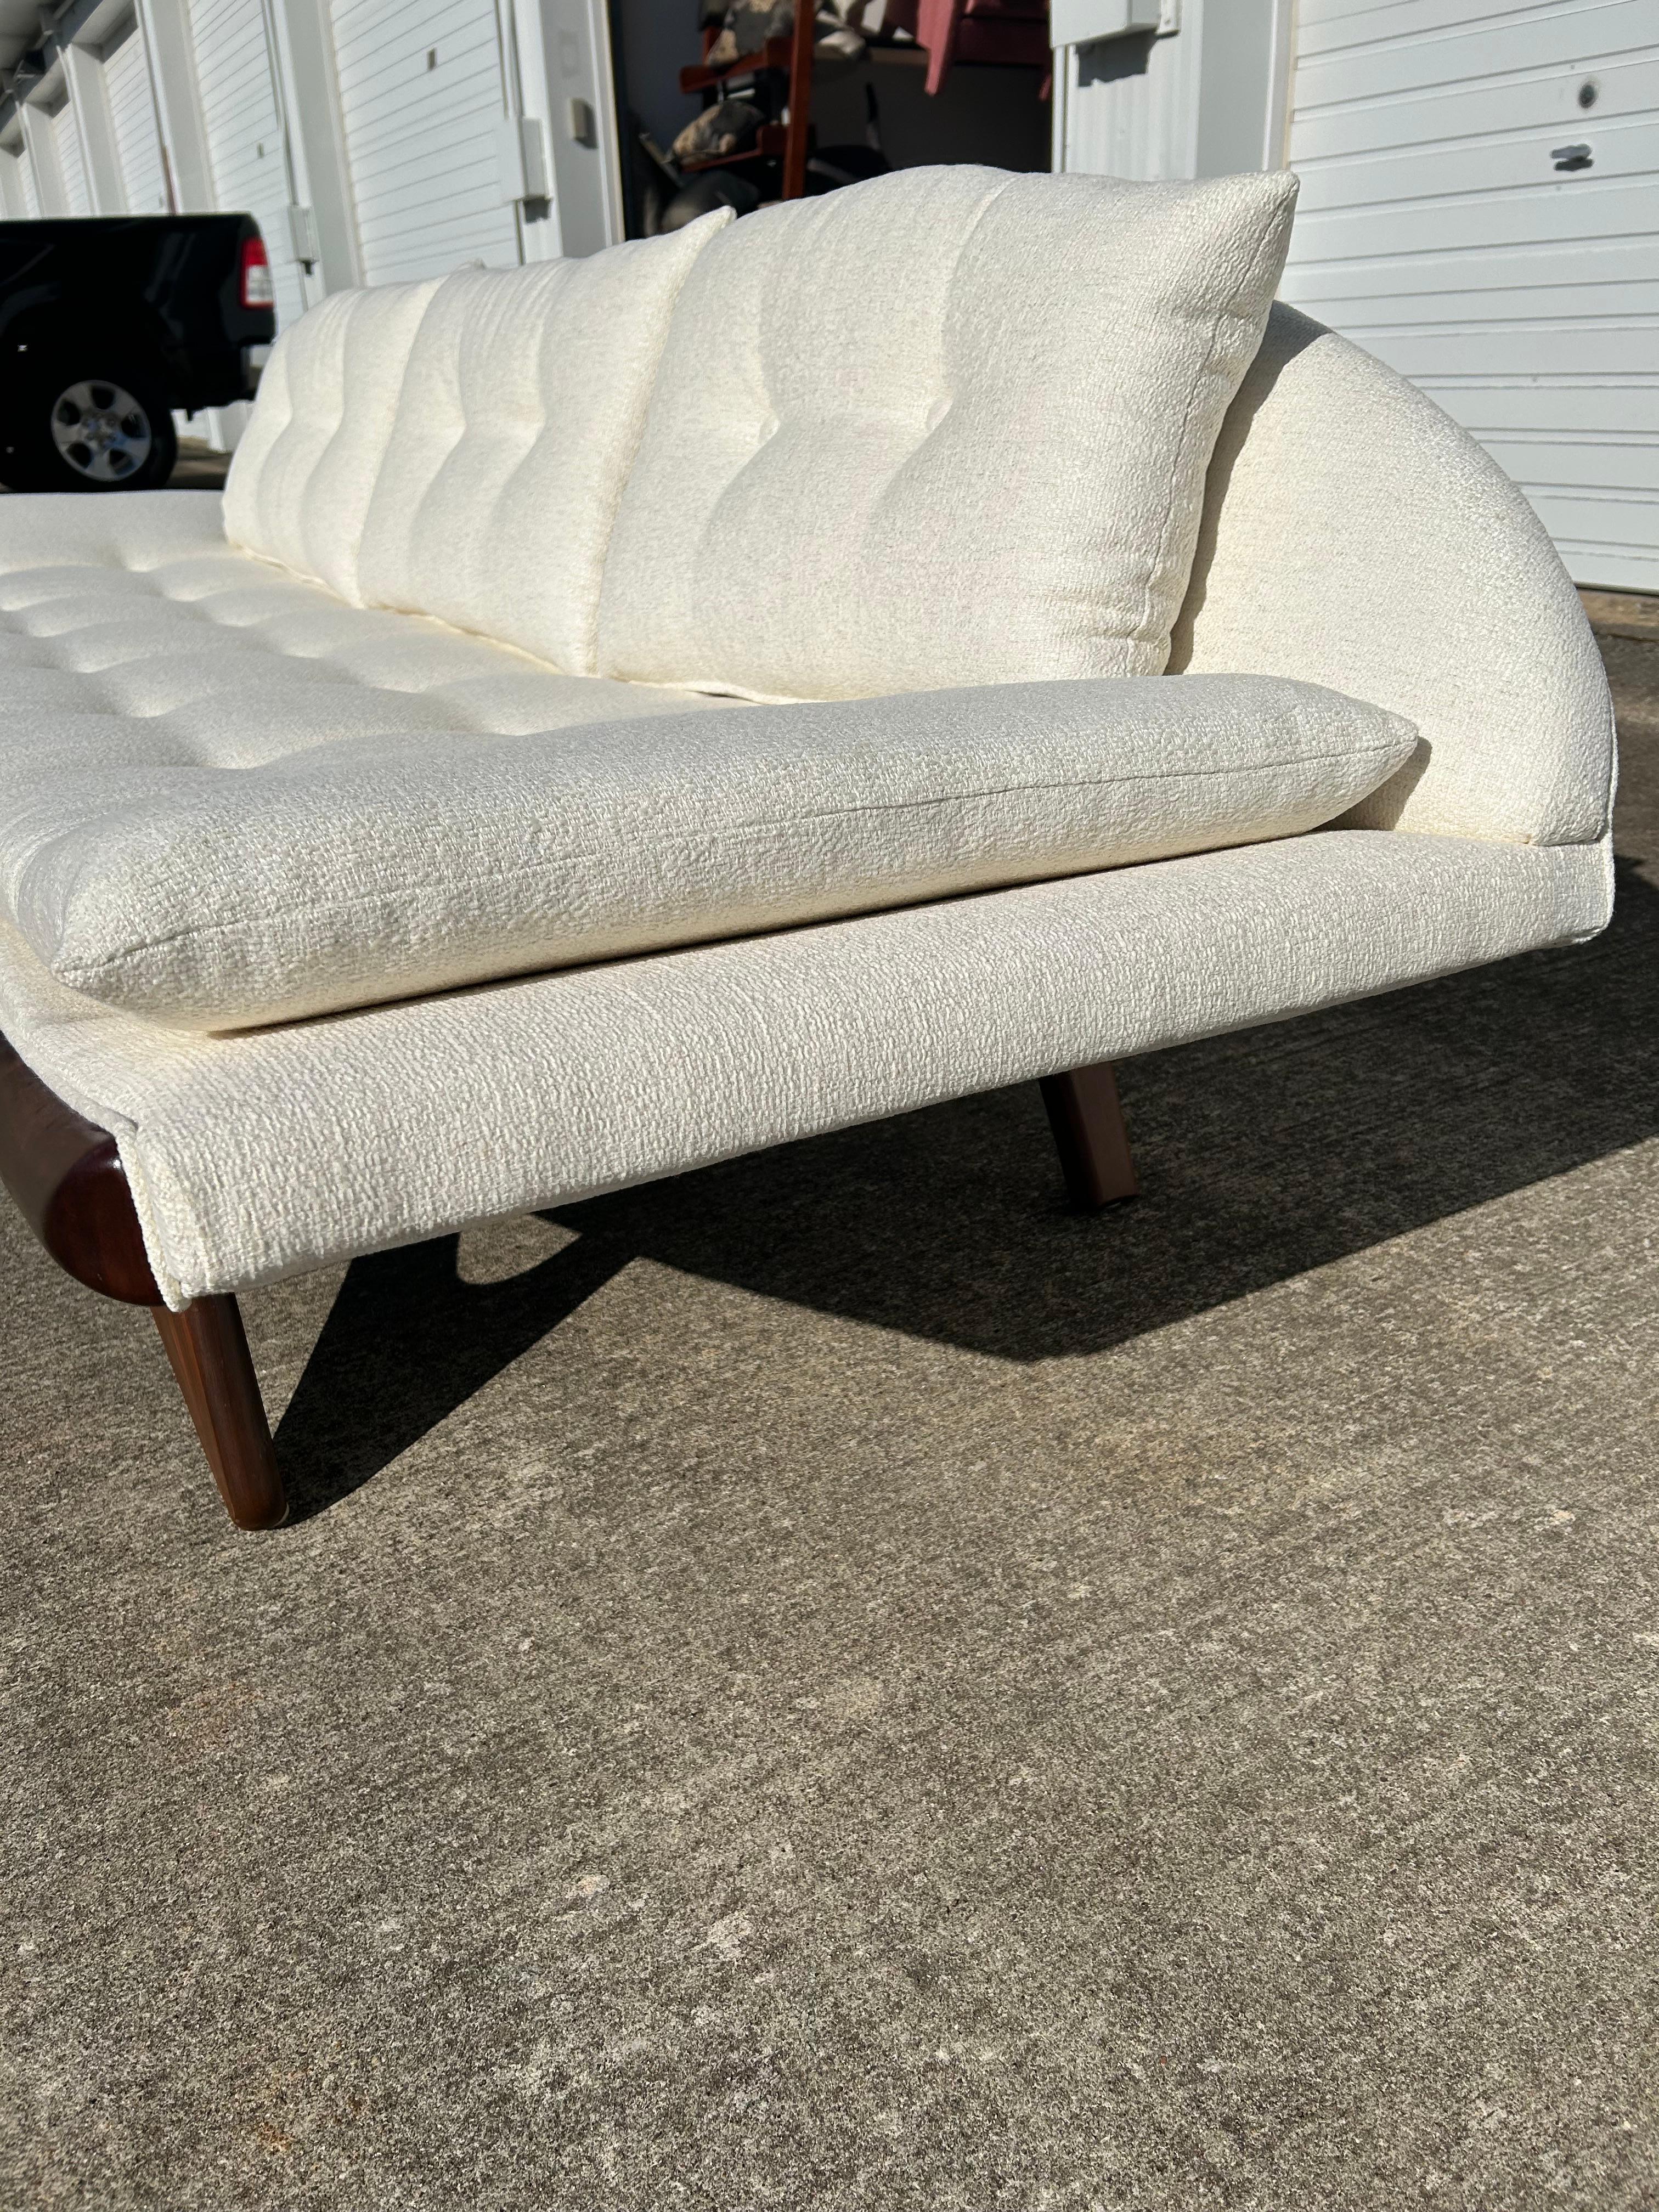 Mid-20th Century Expertly Restored Adrian Pearsall Armless Gondola Sofa for Craft Associates For Sale